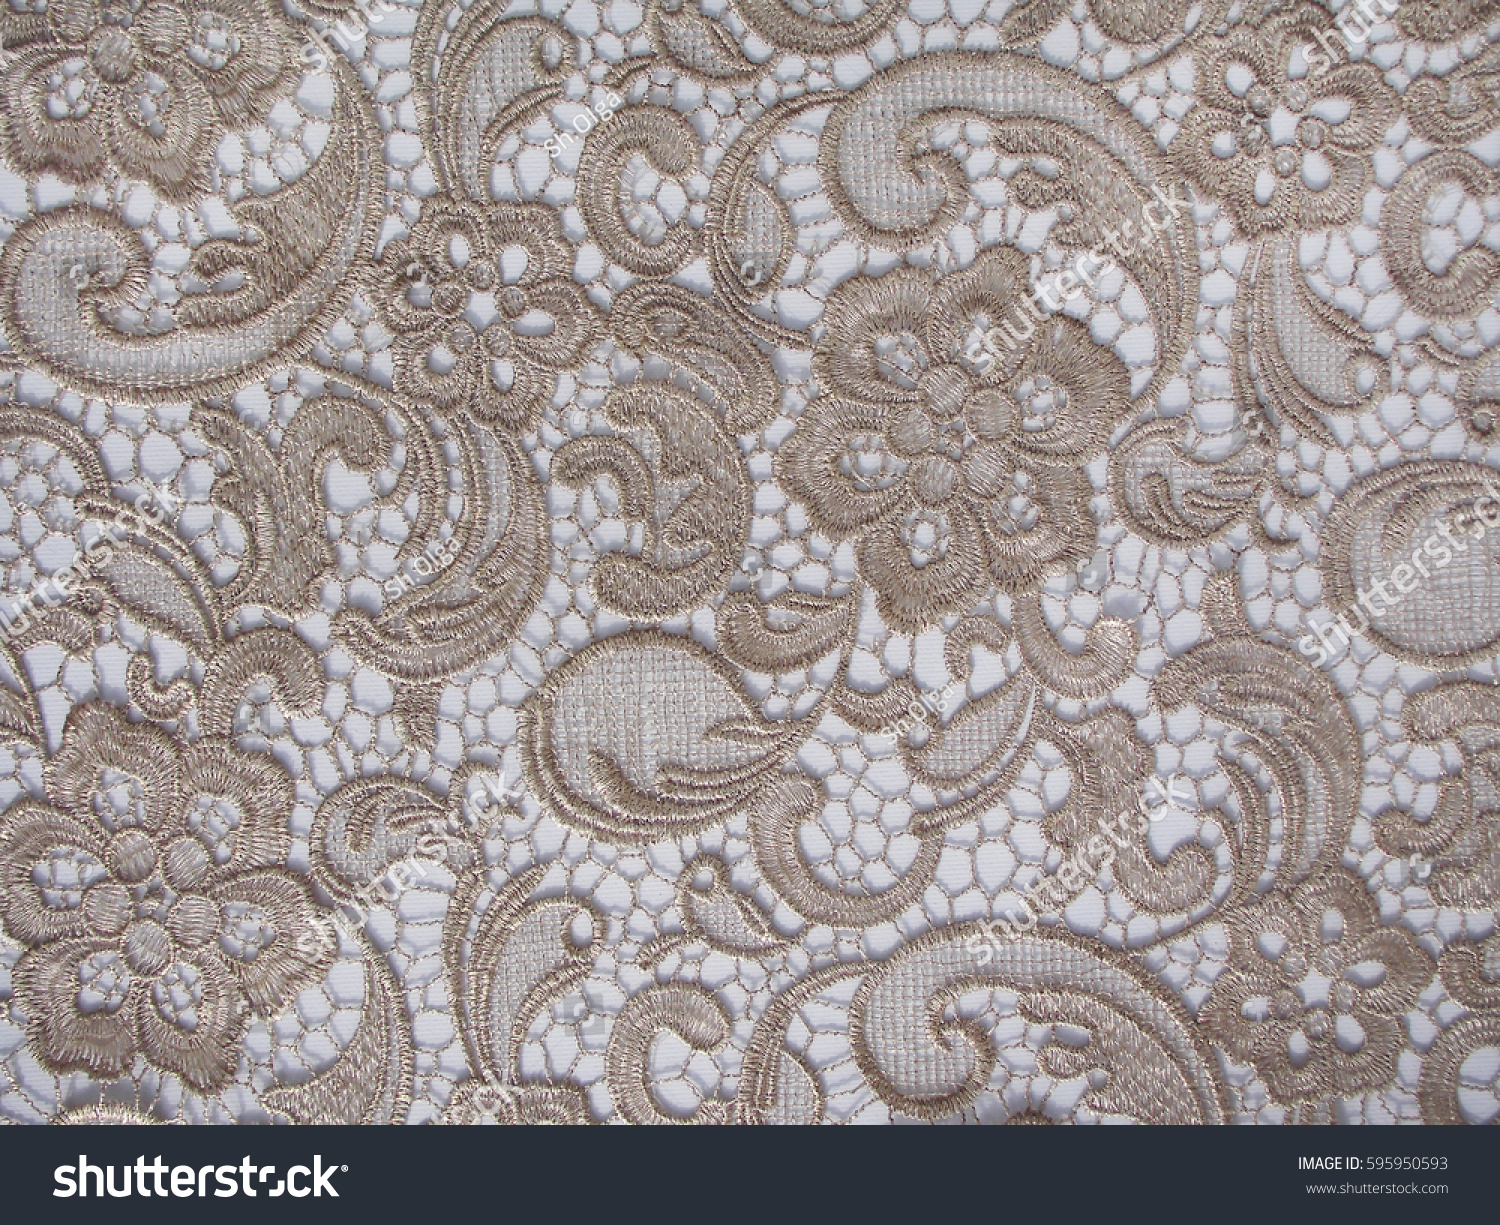 fabric flowers lace